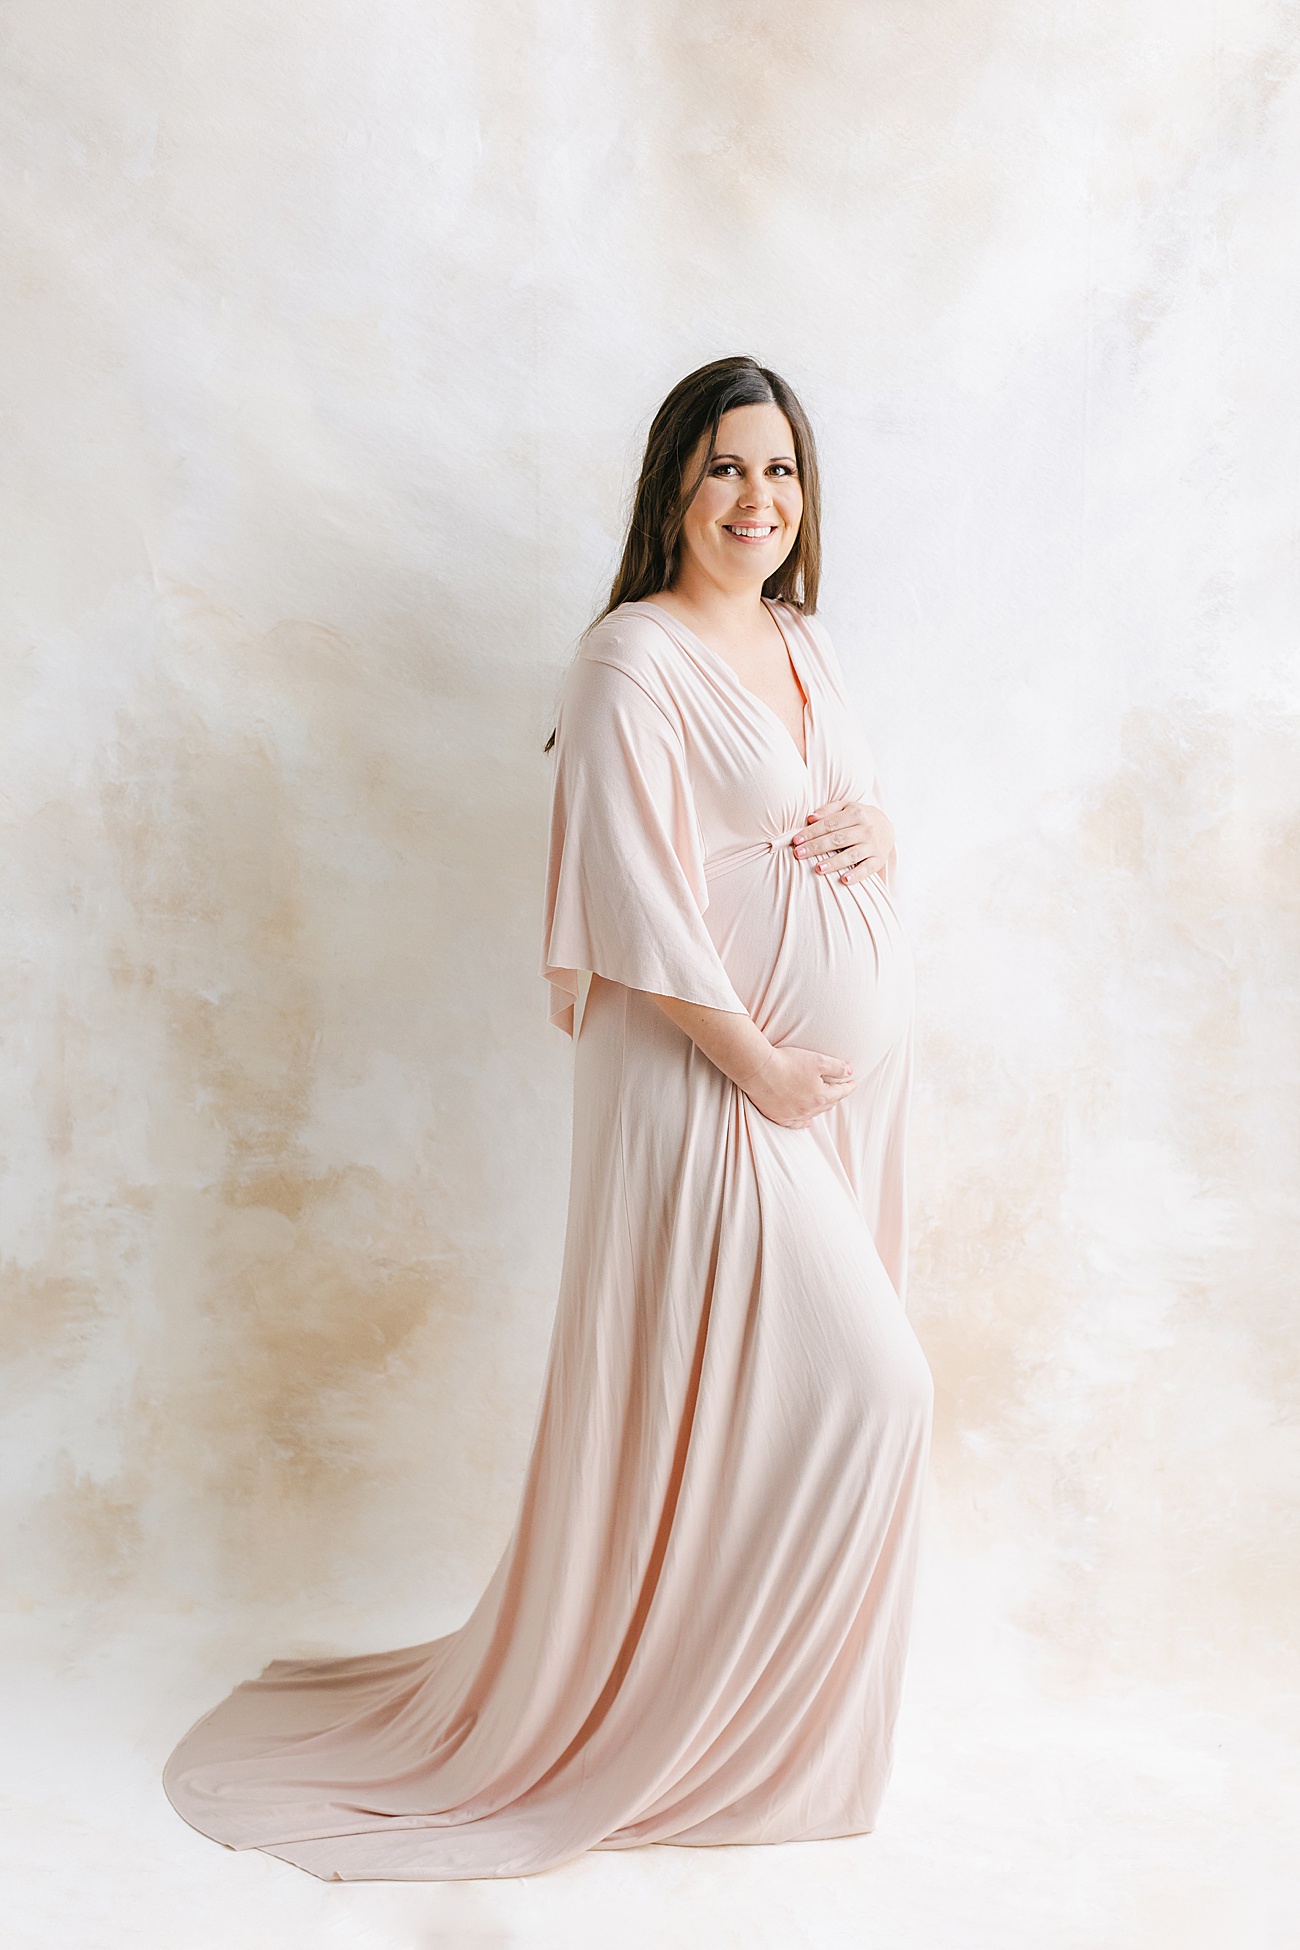 Expecting Mom wearing blush maxi dress in front of custom, hand-painted backdrop during maternity photos in Austin, TX studio. Photo by Sana Ahmed Photography.